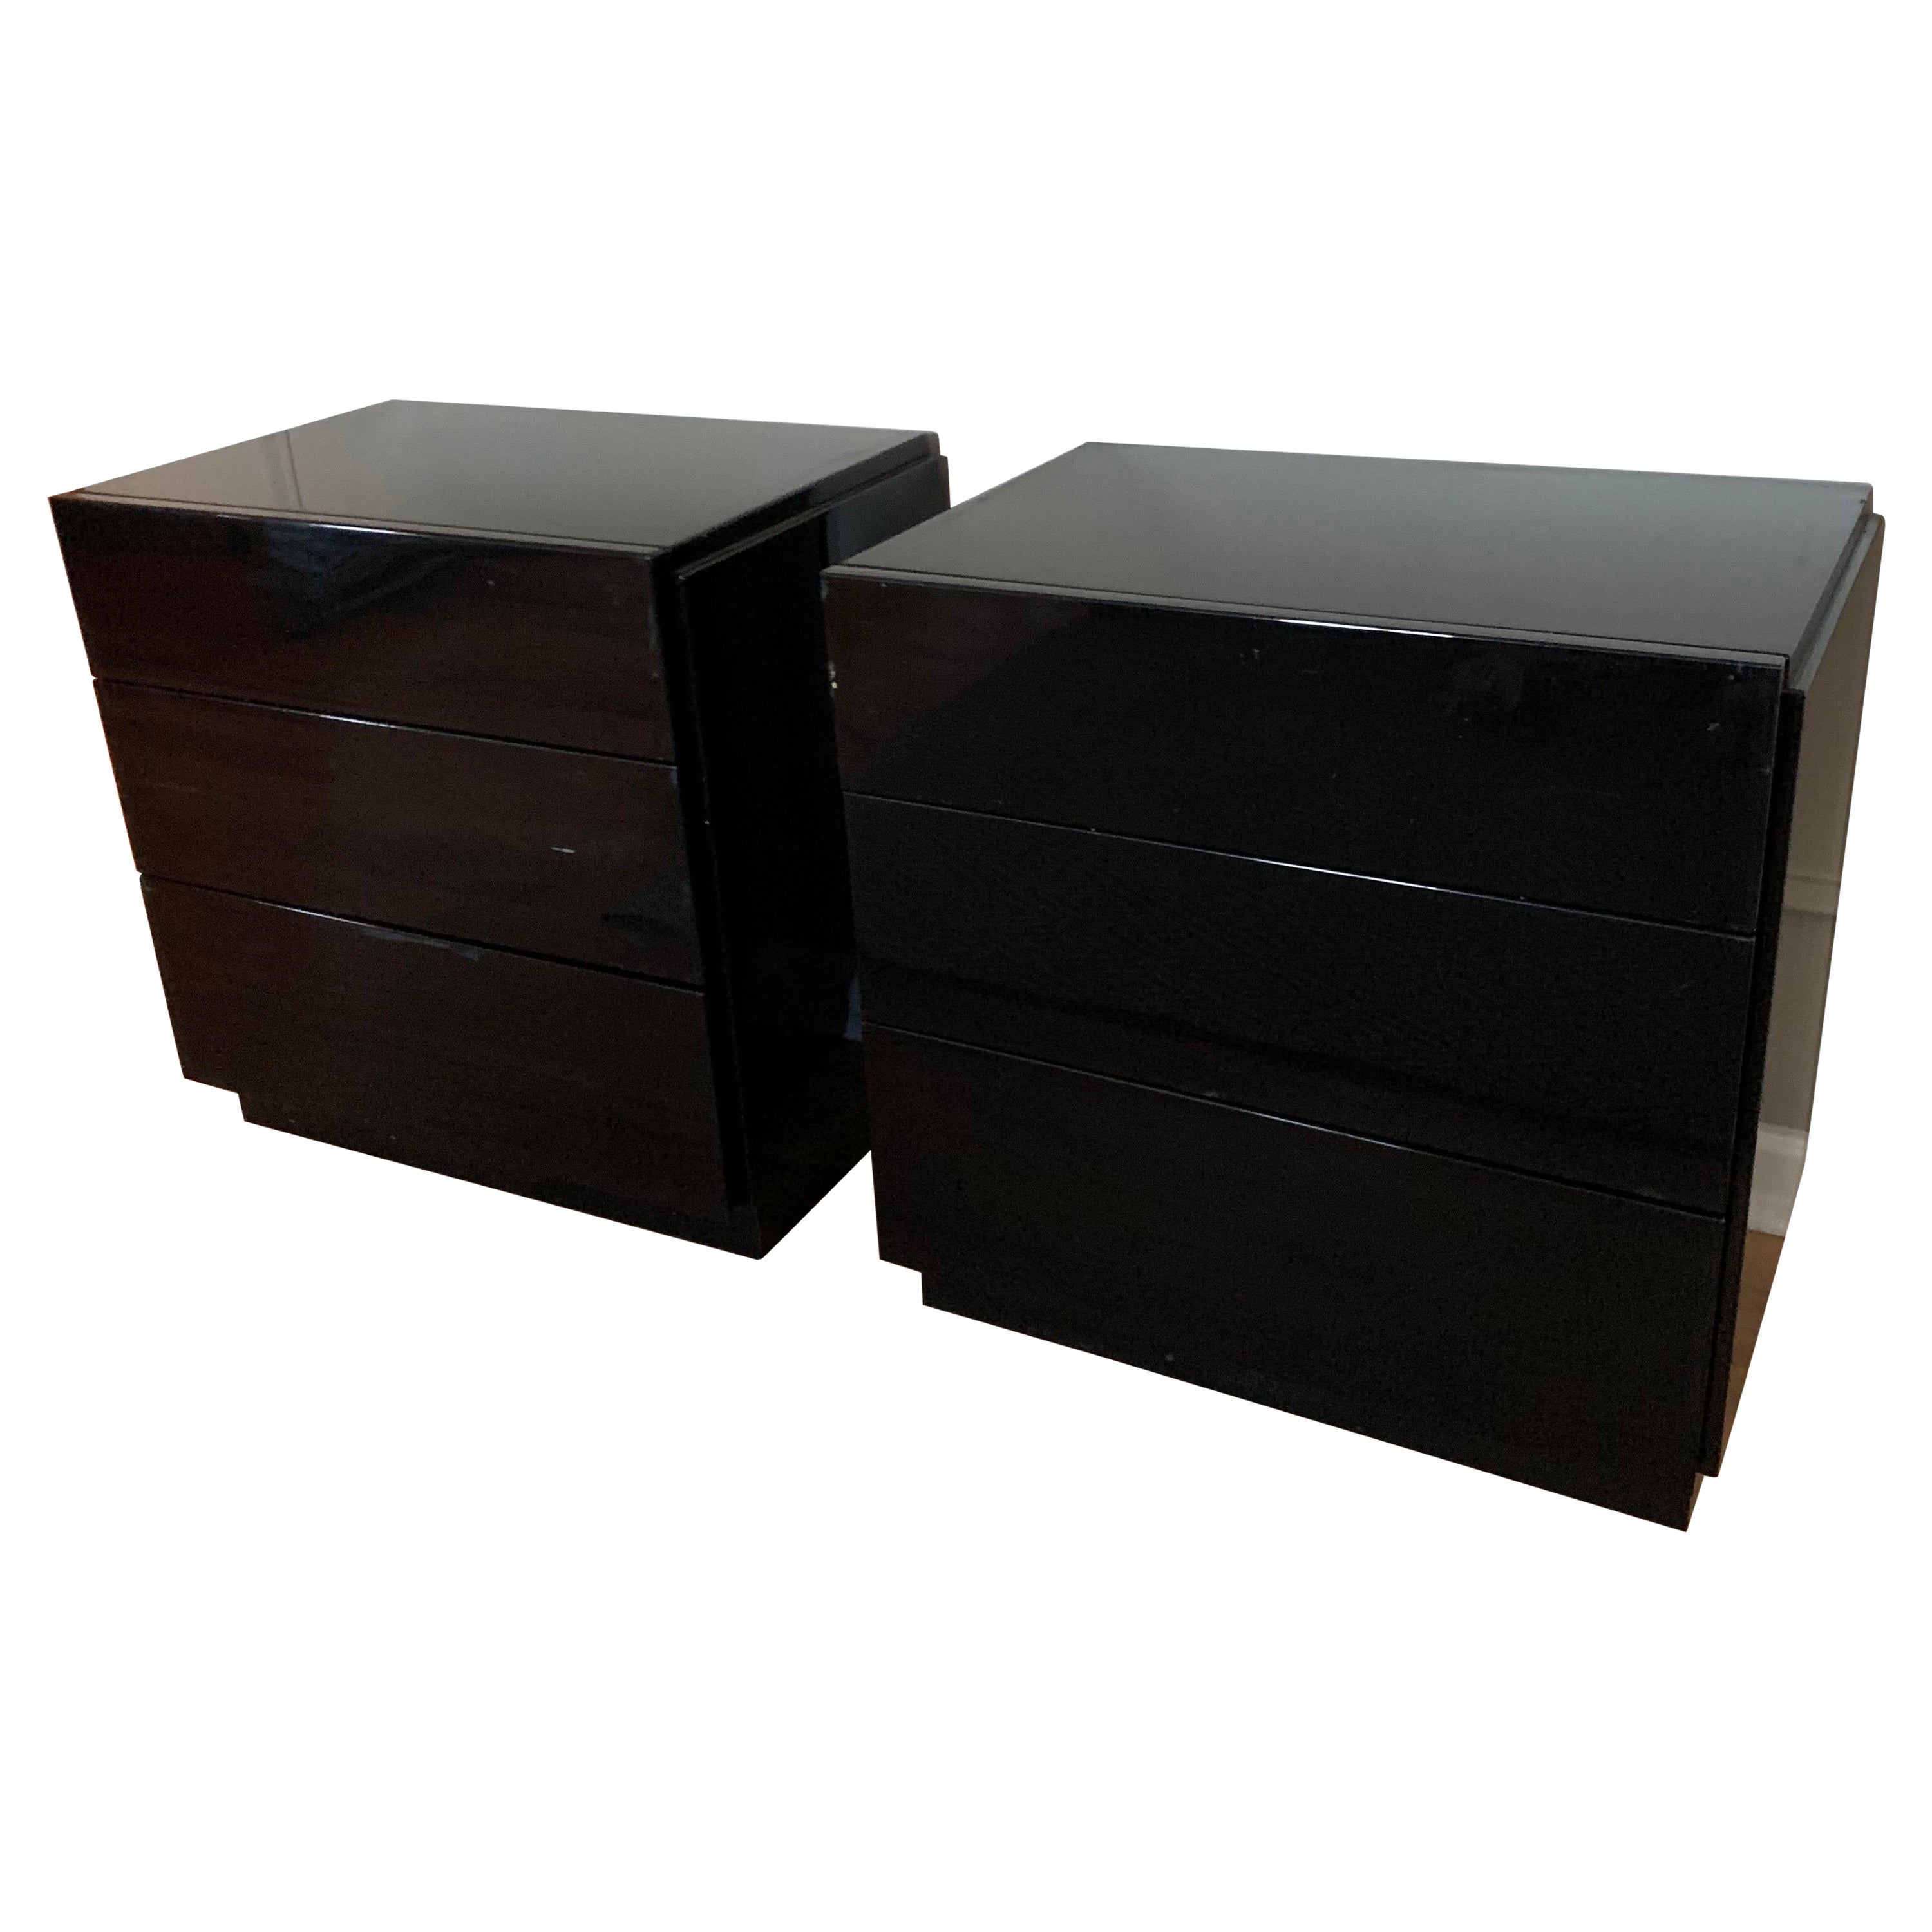 1980's Henredon Bridgeford Lacquered Nightstands - a Pair For Sale